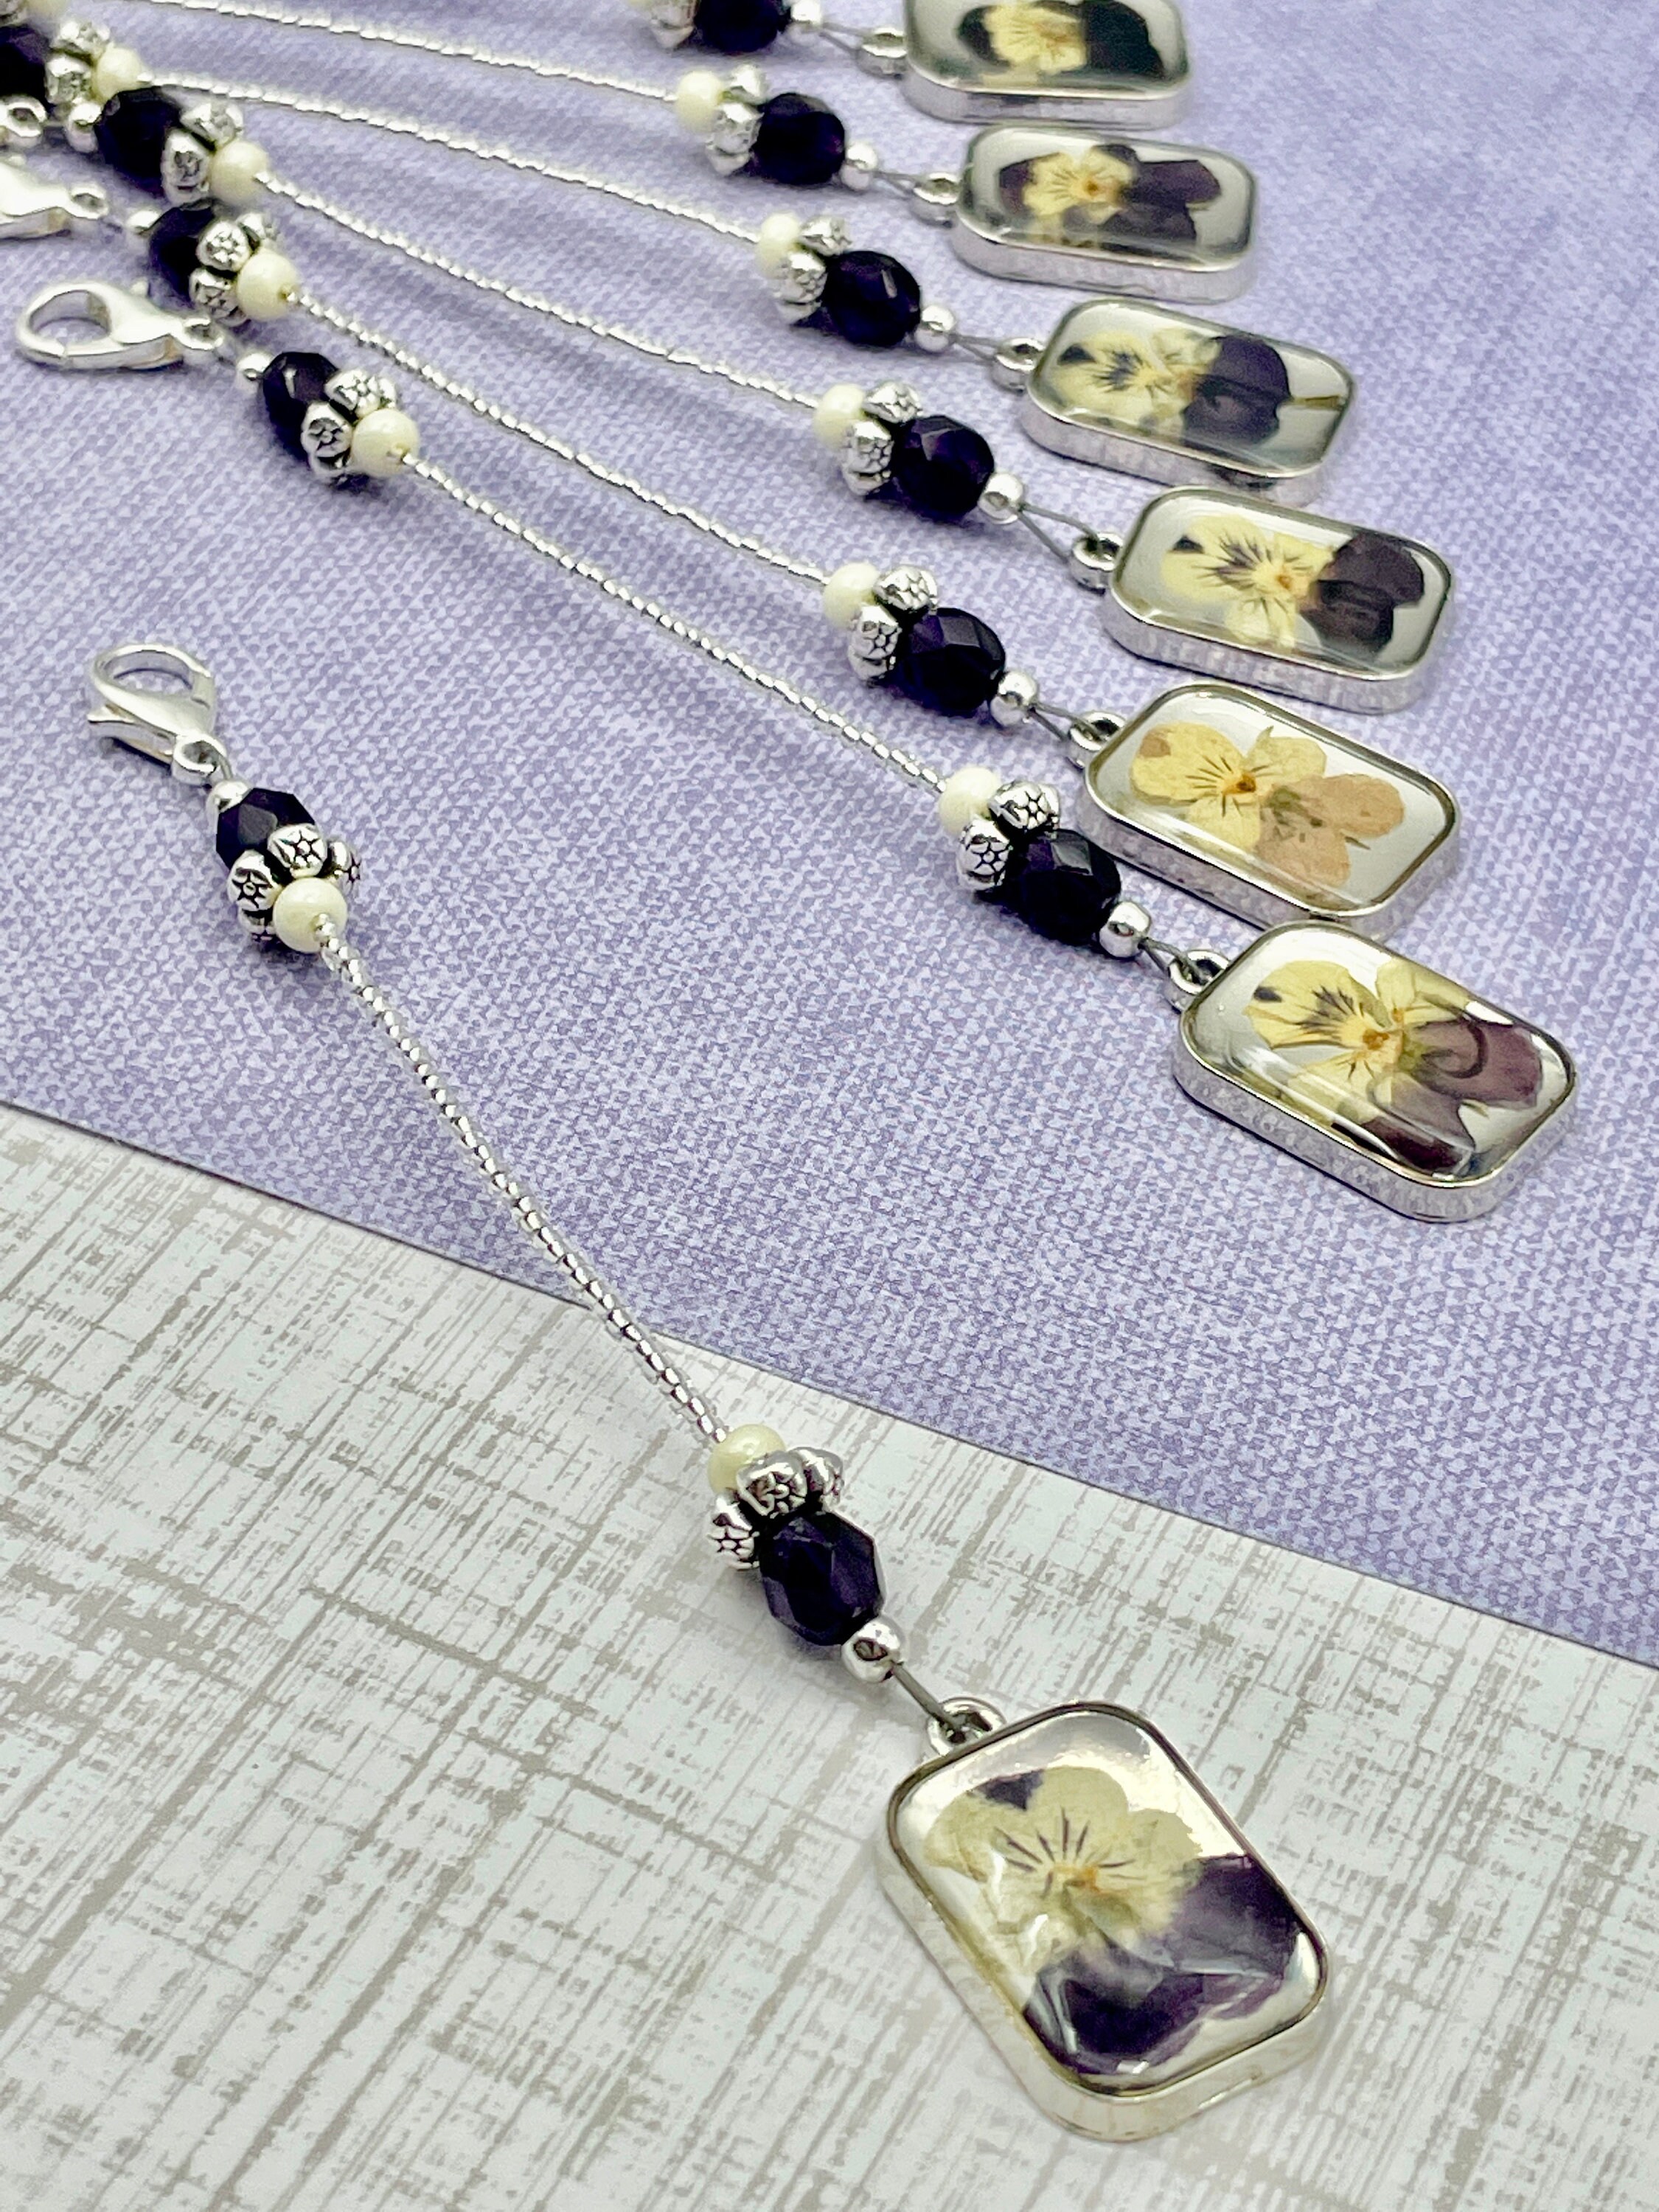 Set of 8 Formal Dress Zipper Pulls Violets, Flowers, Wedding Charm, Wedding Token, Gift Ideas, for Bridesmaid, Remembrance, Zipper Charms Accessoires Sleutelhangers & Keycords Ritshangers 